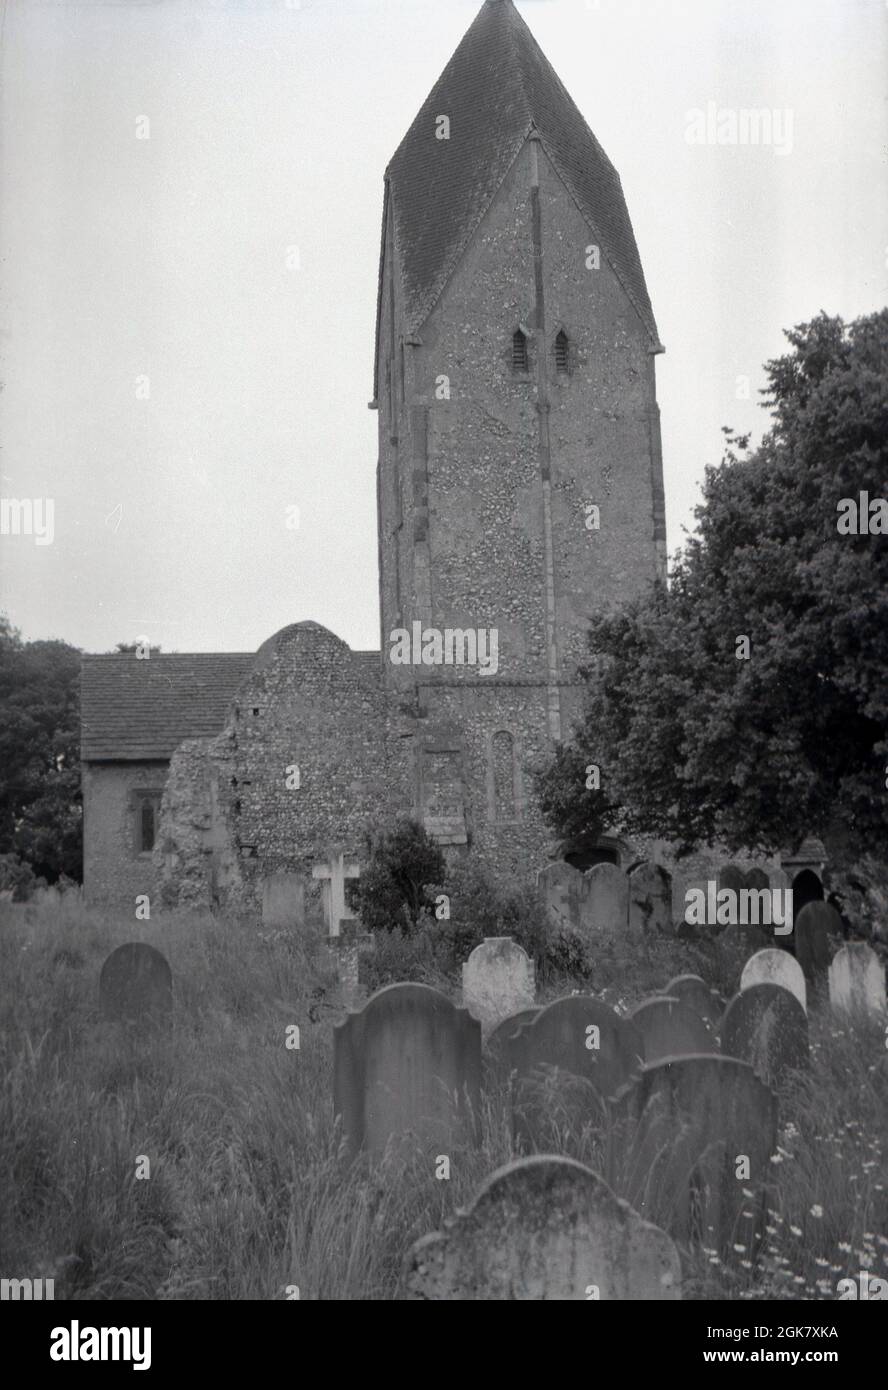 1962, historical, view from this era of the distinctive church tower of St Mary's with its Rhenish helm, at Sompting, Littelhampton, West Sussex, England, UK and surrounding graveyard. The four-sided pyramid-style gabled cap on top of the saxon tower is an unusual feature in England. The flint built church was of such exceptional historical importance, that it was listed as a Grade I building by English Heritage in 1954, making it a rare building as only 2.5% of all listed buildings in England are classified as Grade 1. Stock Photo